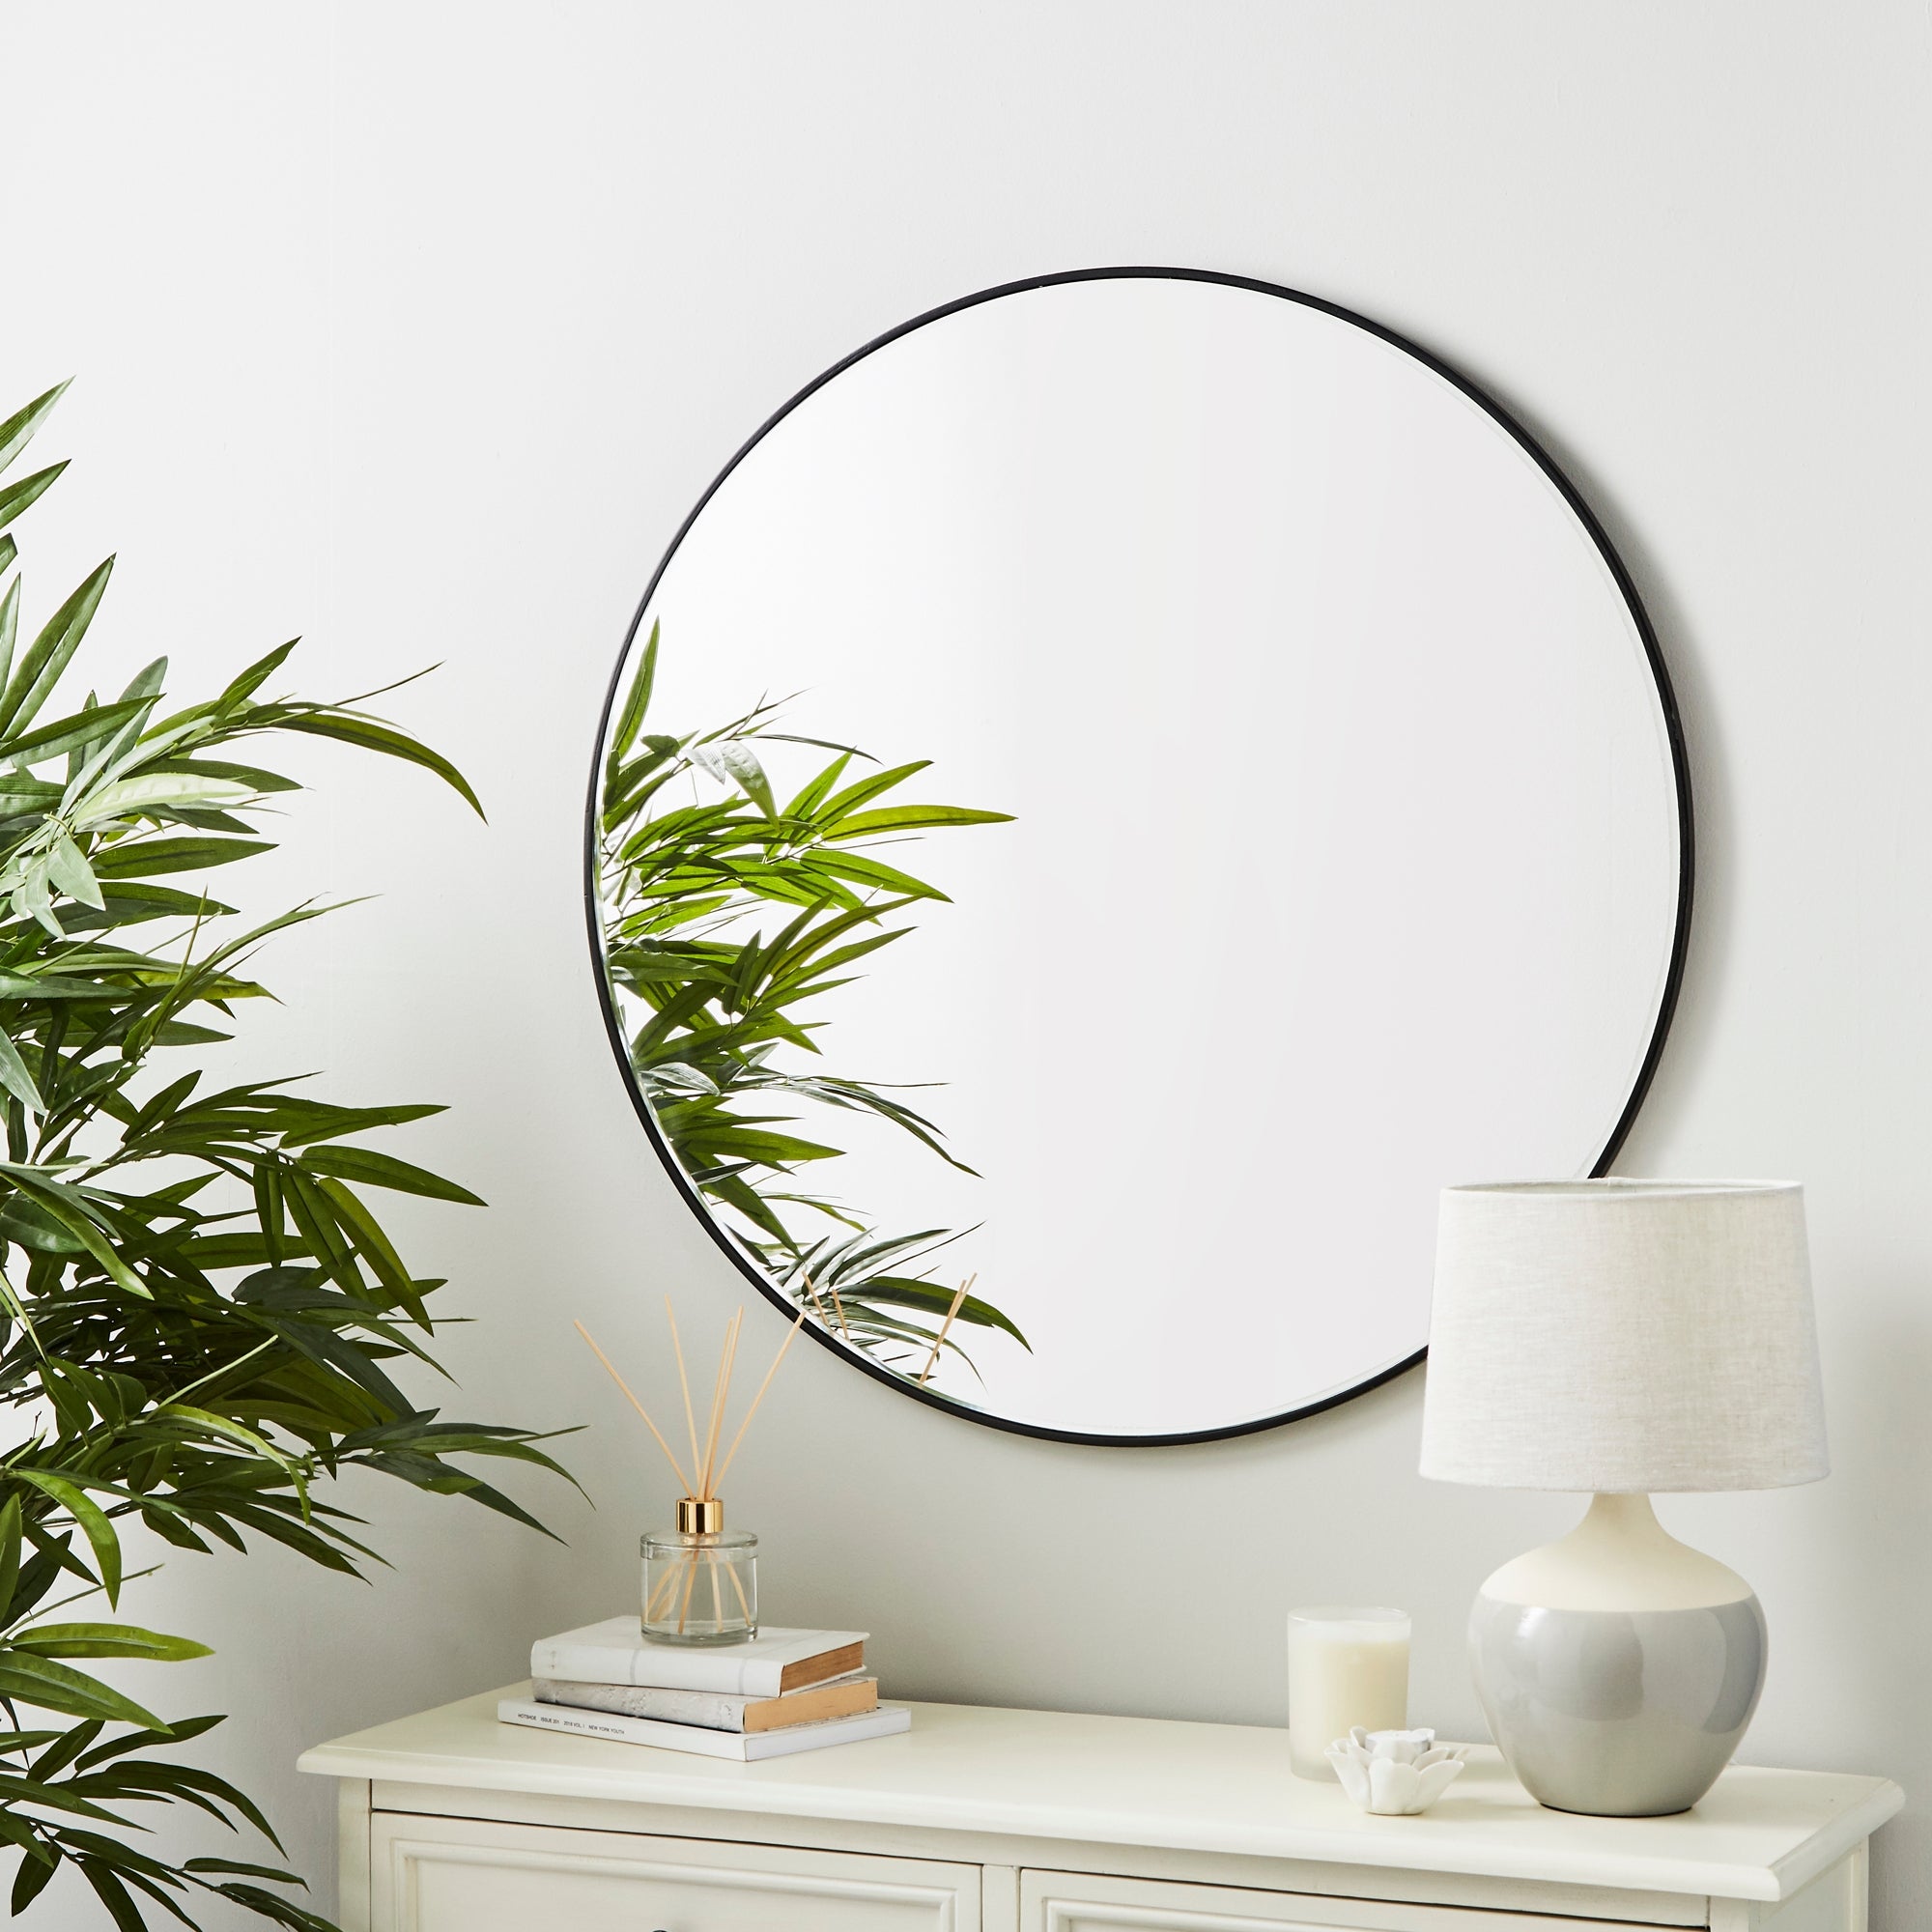 Black Mirrors For Your Home | Dunelm